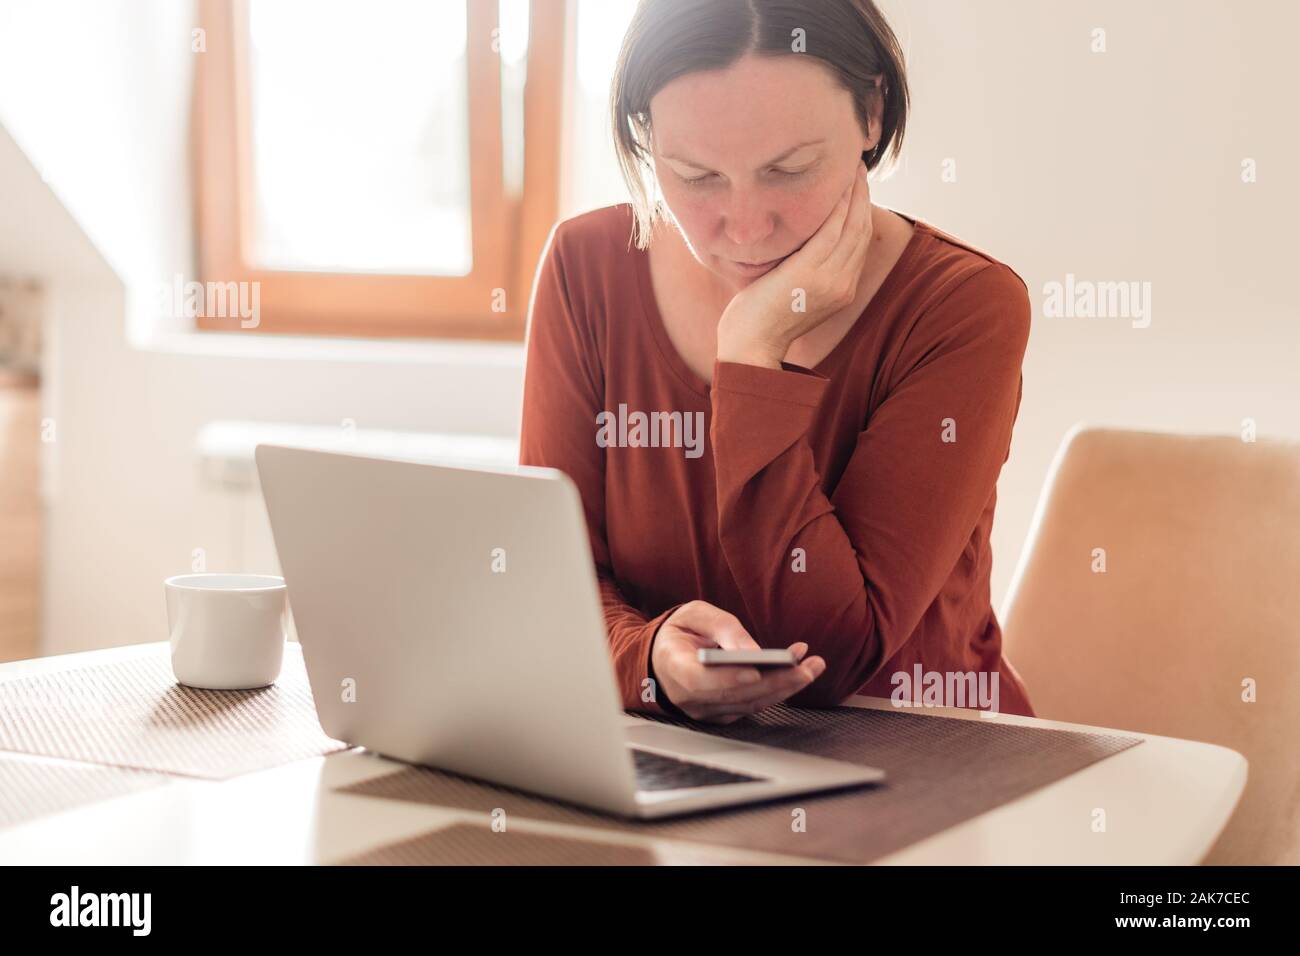 Woman telecommuting in home office interior. Portrait of female freelancer using mobile phone, selective focus. Stock Photo